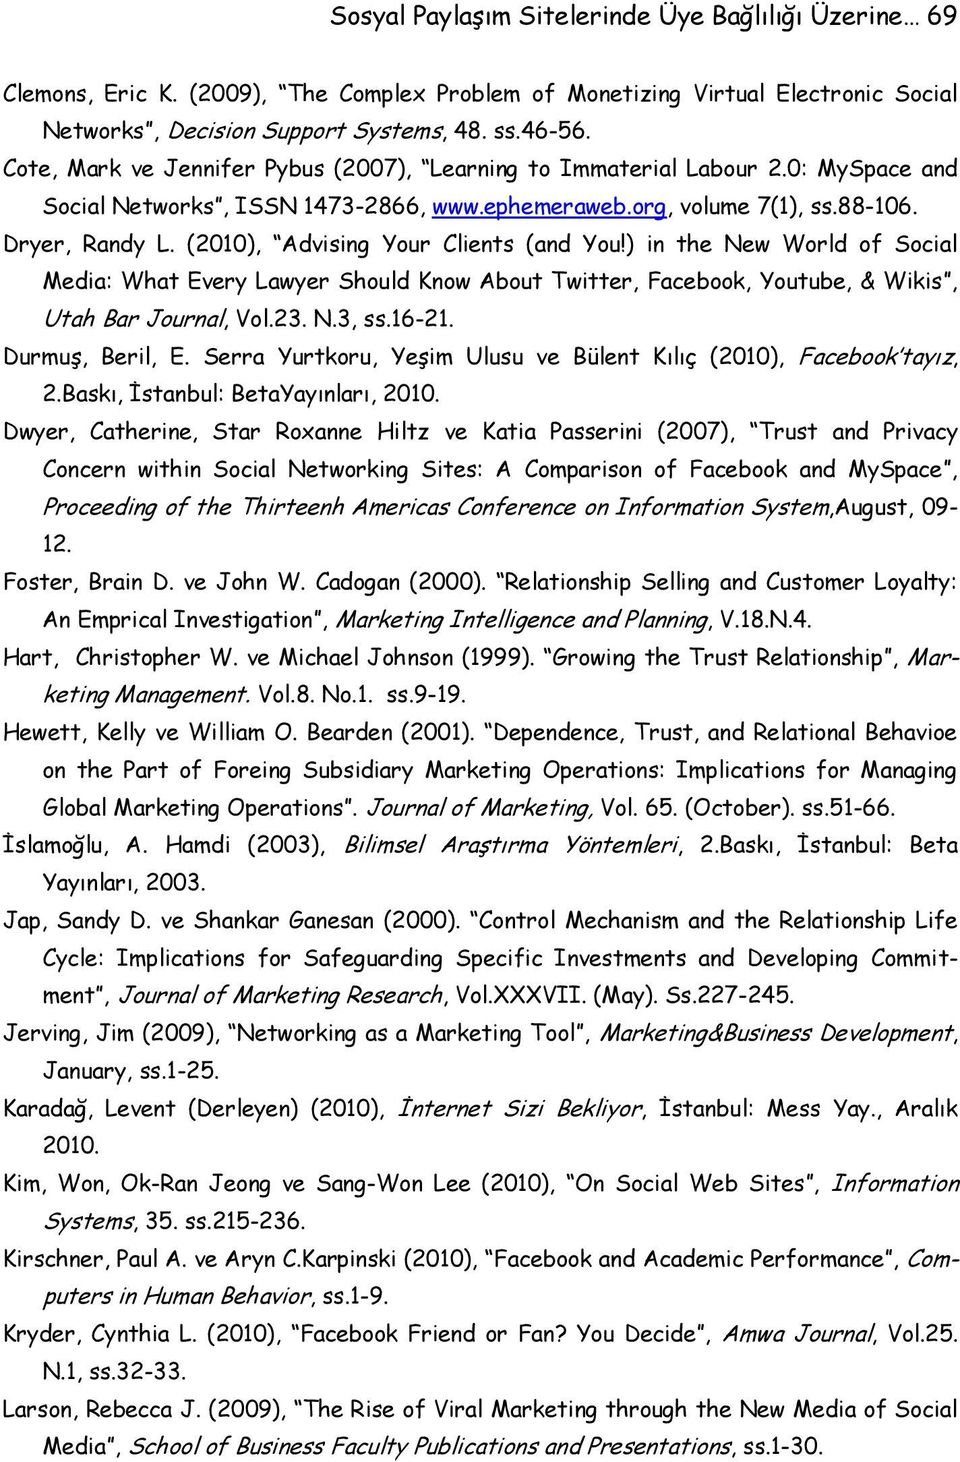 (2010), Advising Your Clients (and You!) in the New World of Social Media: What Every Lawyer Should Know About Twitter, Facebook, Youtube, & Wikis, Utah Bar Journal, Vol.23. N.3, ss.16-21.